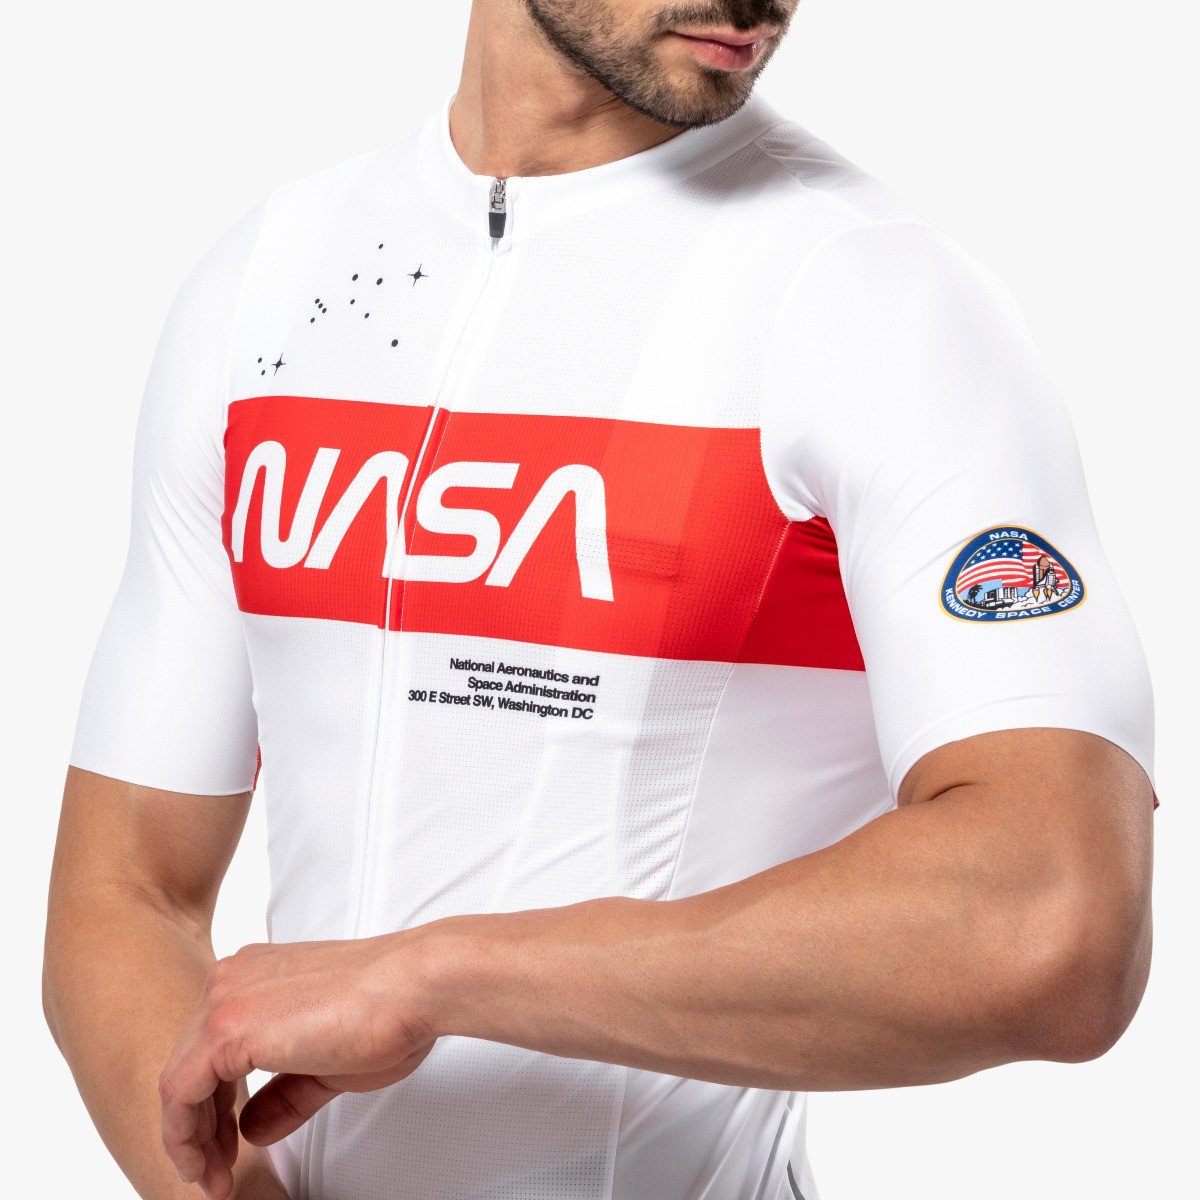 scicon space agency cycling clothing jersey nasa 14